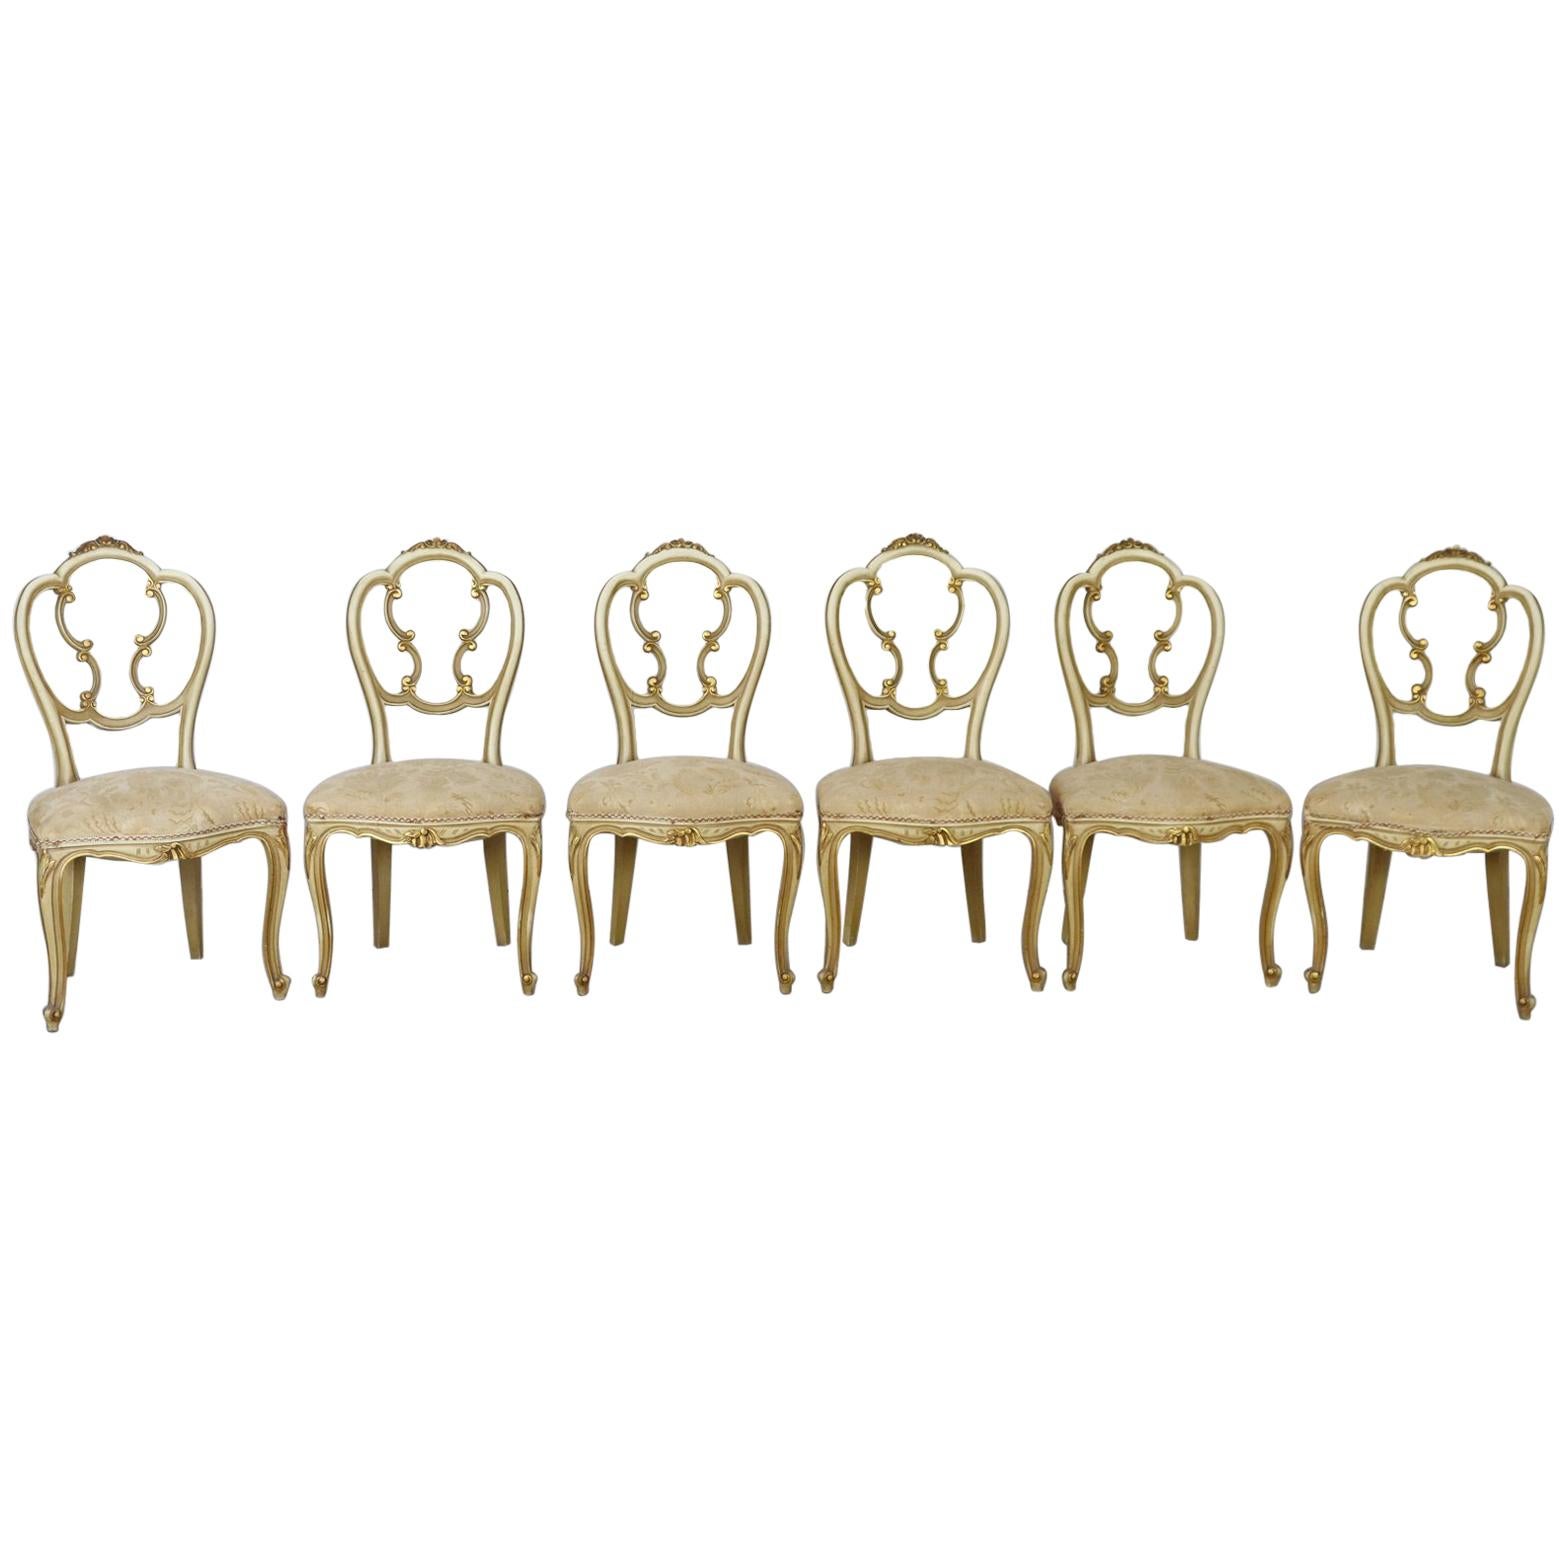 20th Century Italian Baroque Style Carved Lacquered Gilded Wood Six Chairs